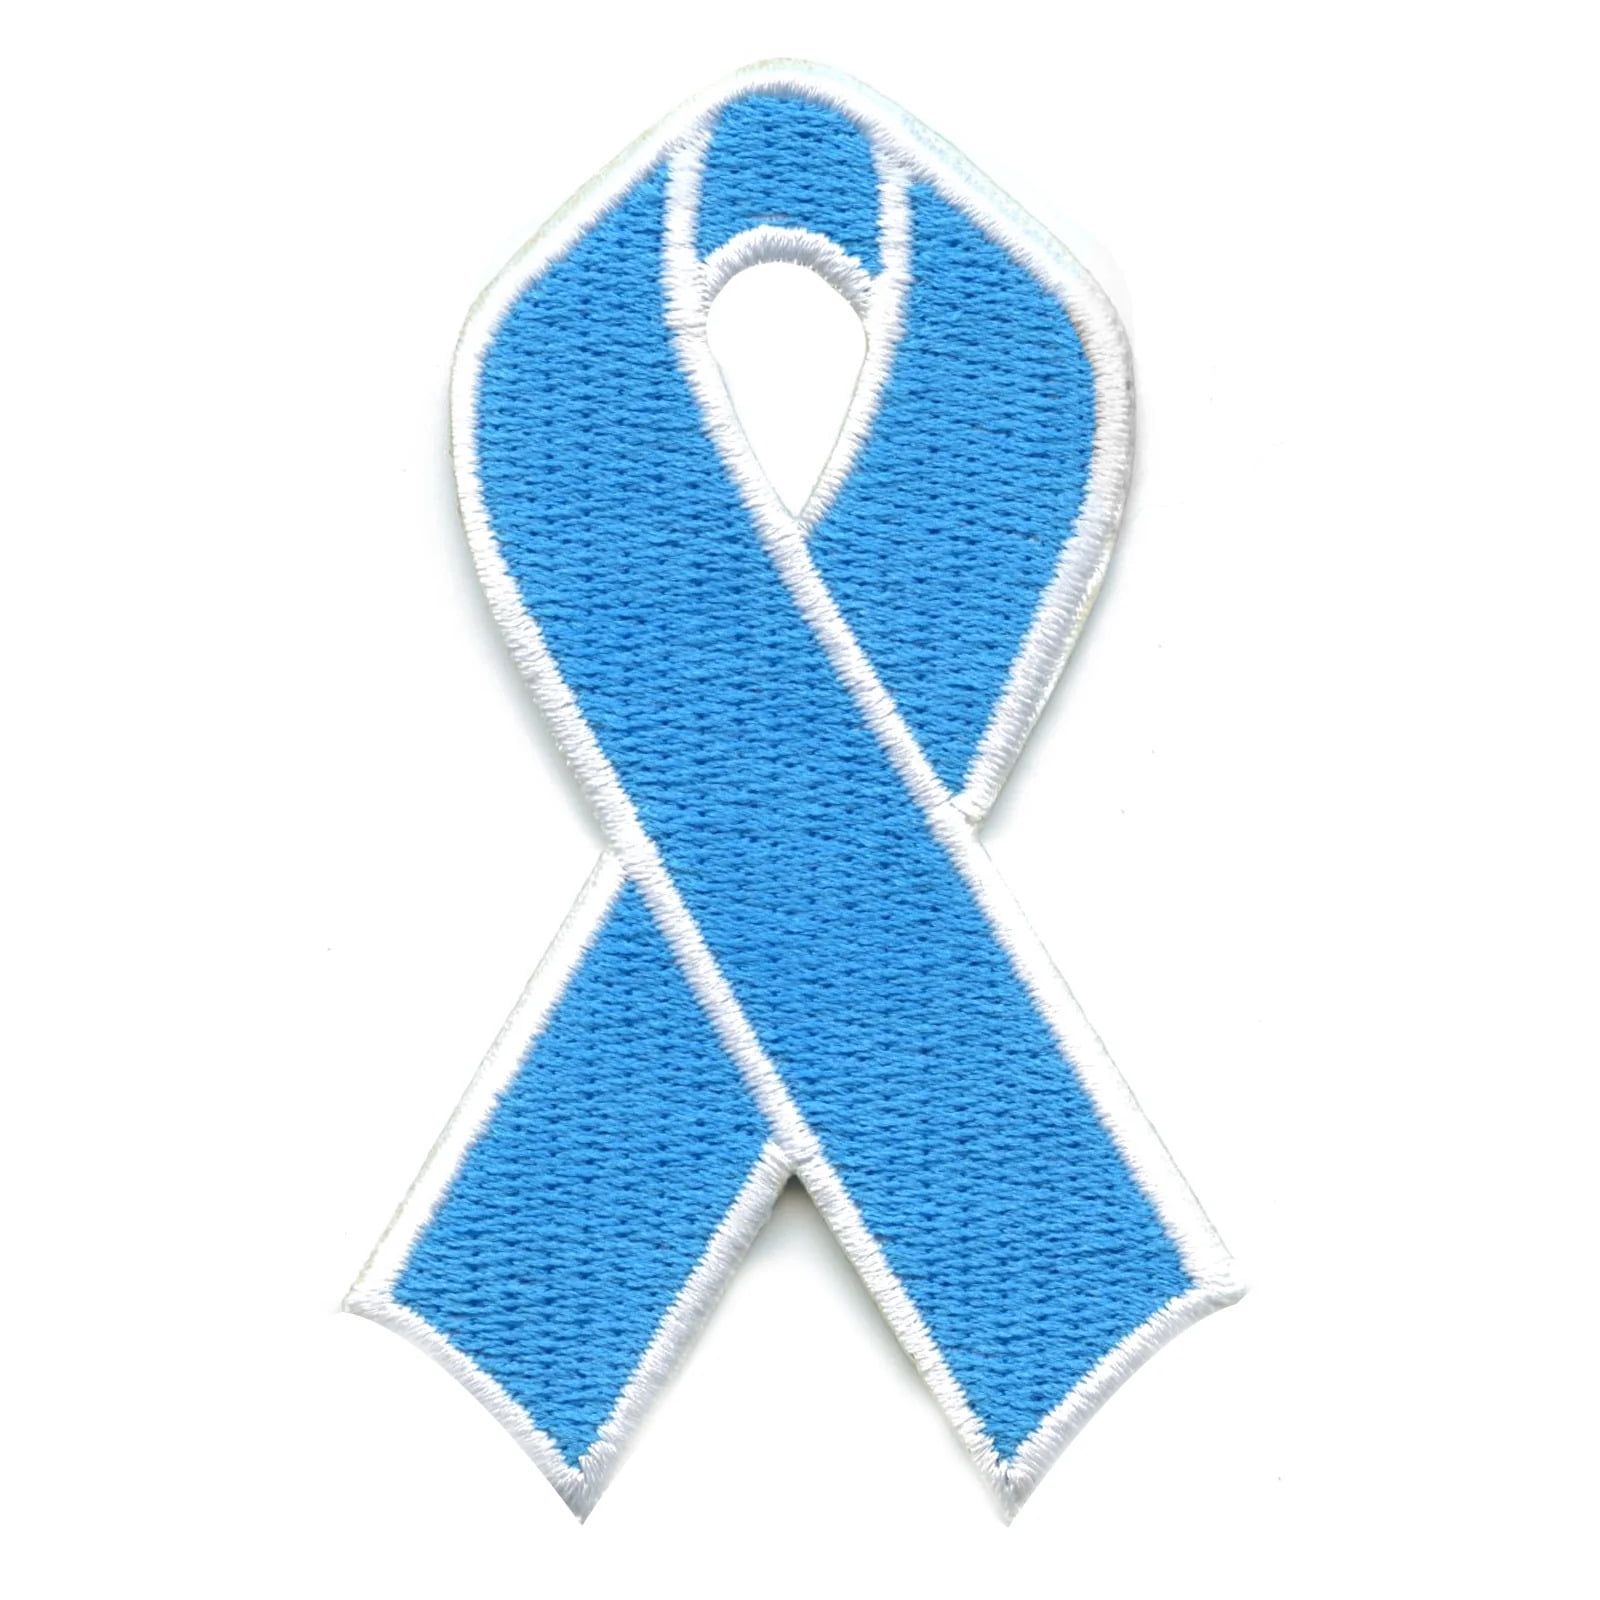 DARK BLUE RIBBON FOR COLON CANCER AWARENESS PATCH IRON ON